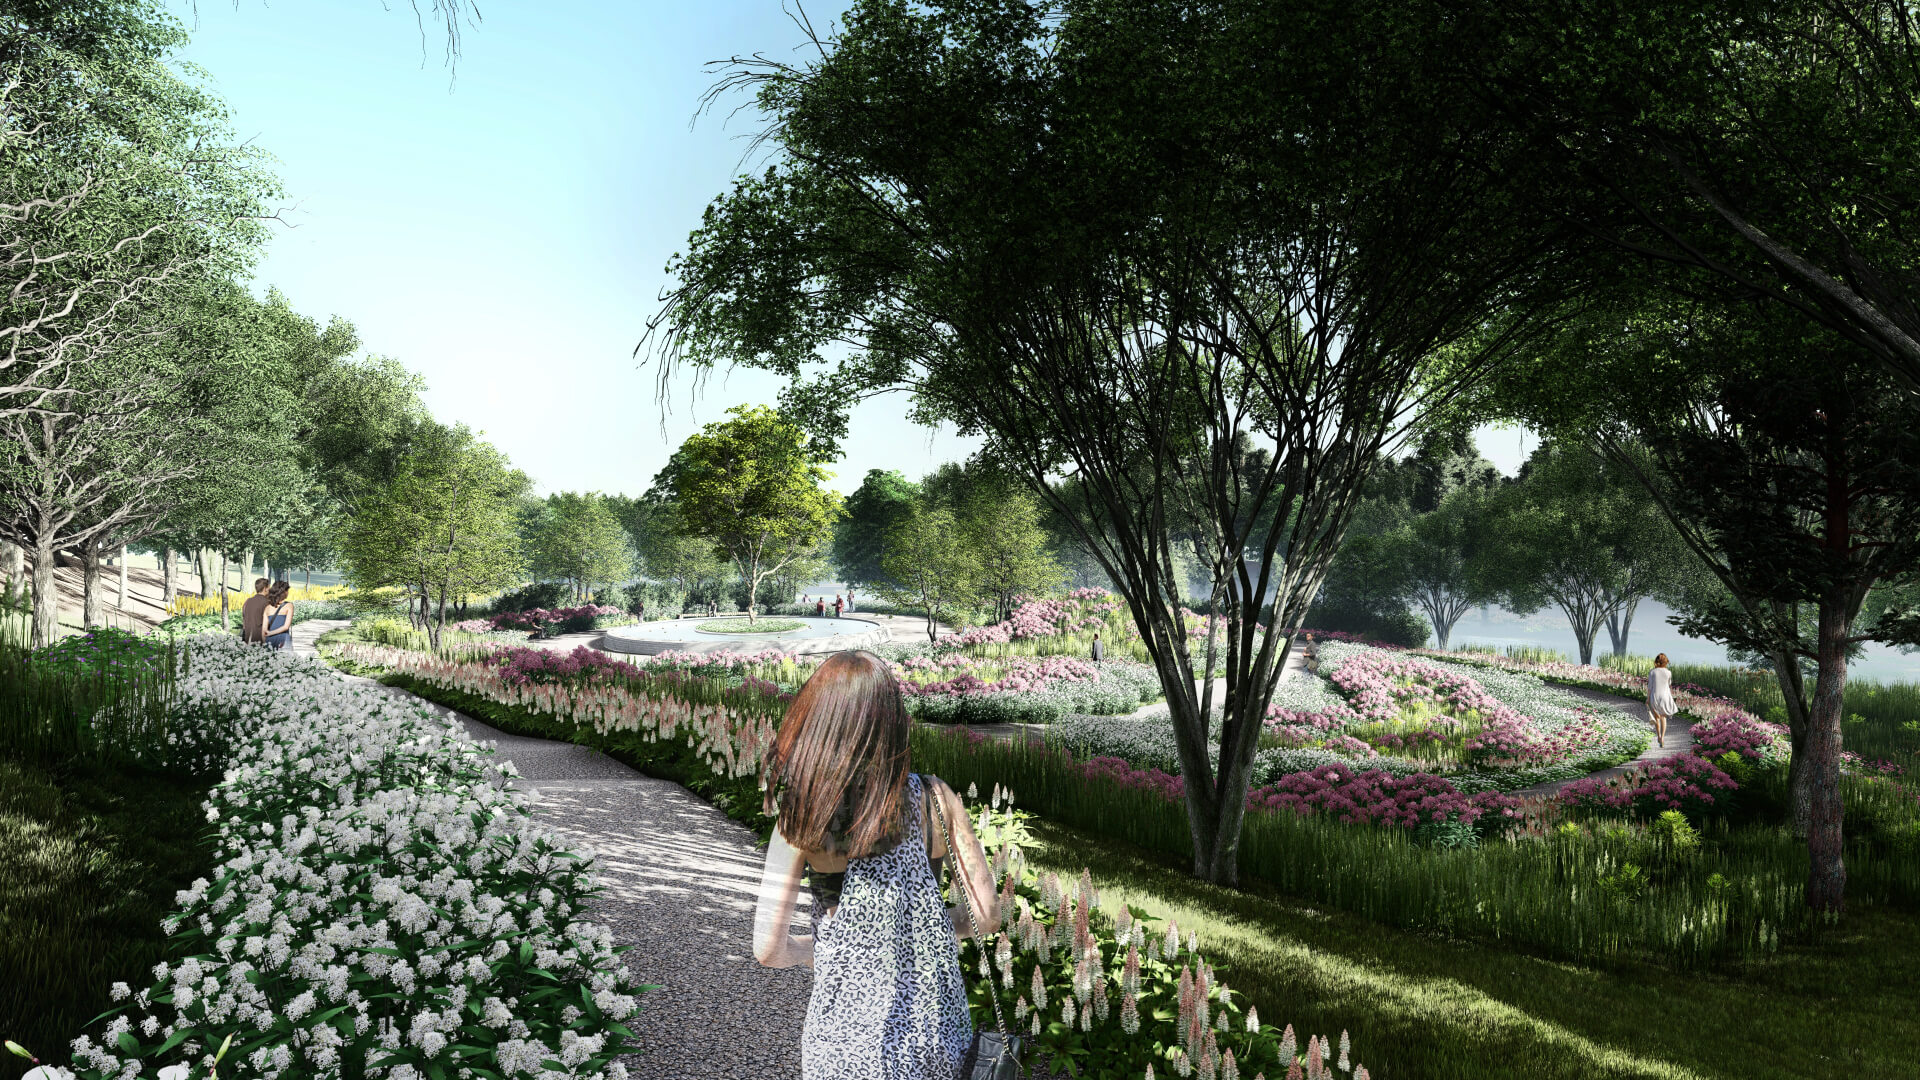 rendering of a woman walking along a flower-lined pathway beneath trees